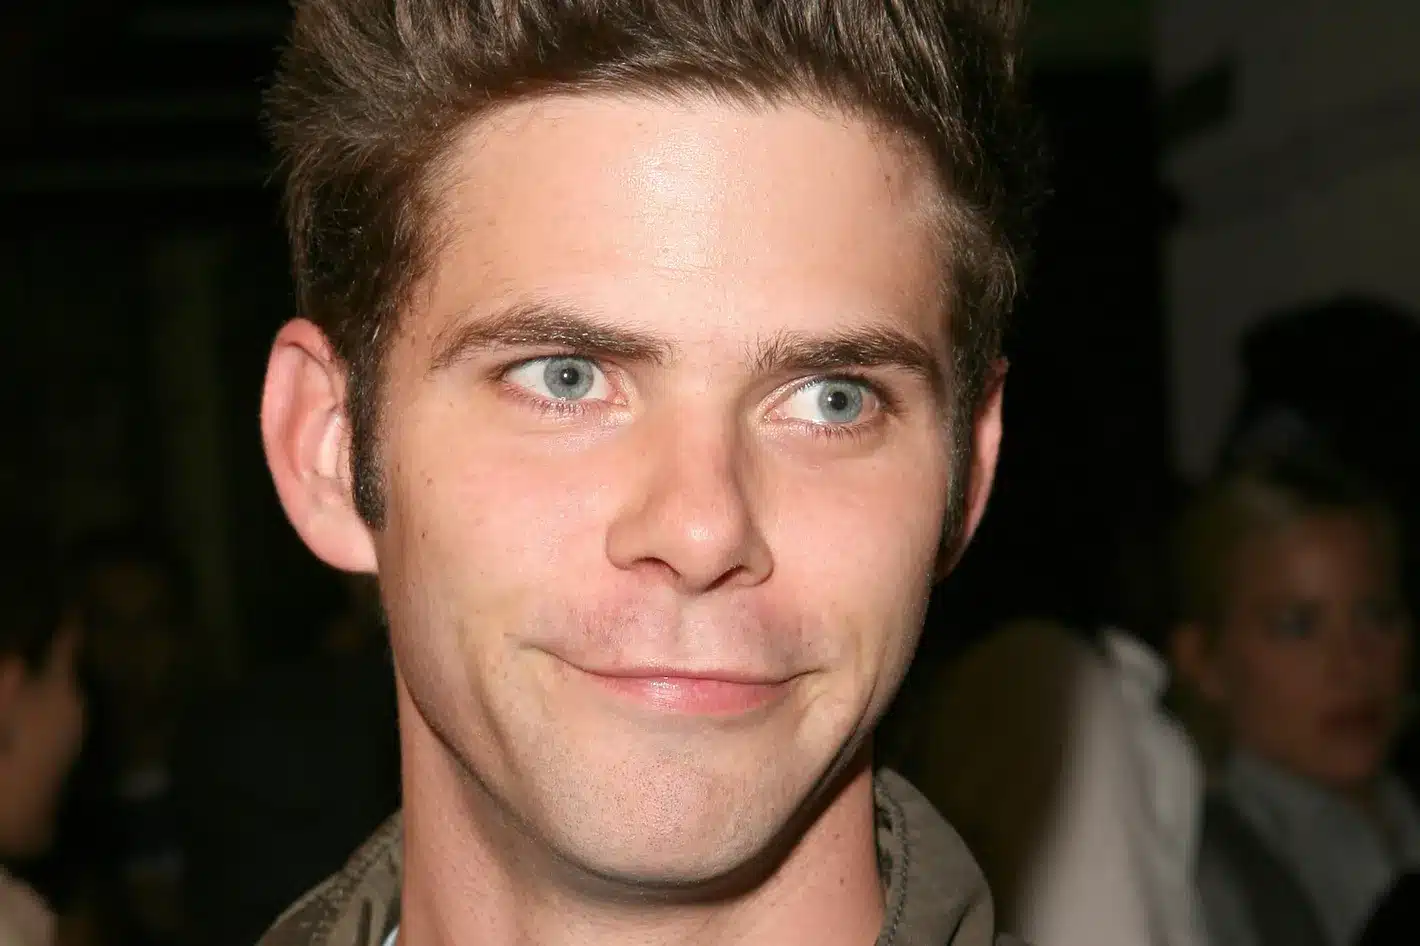 Mikey Day’s Age and Background